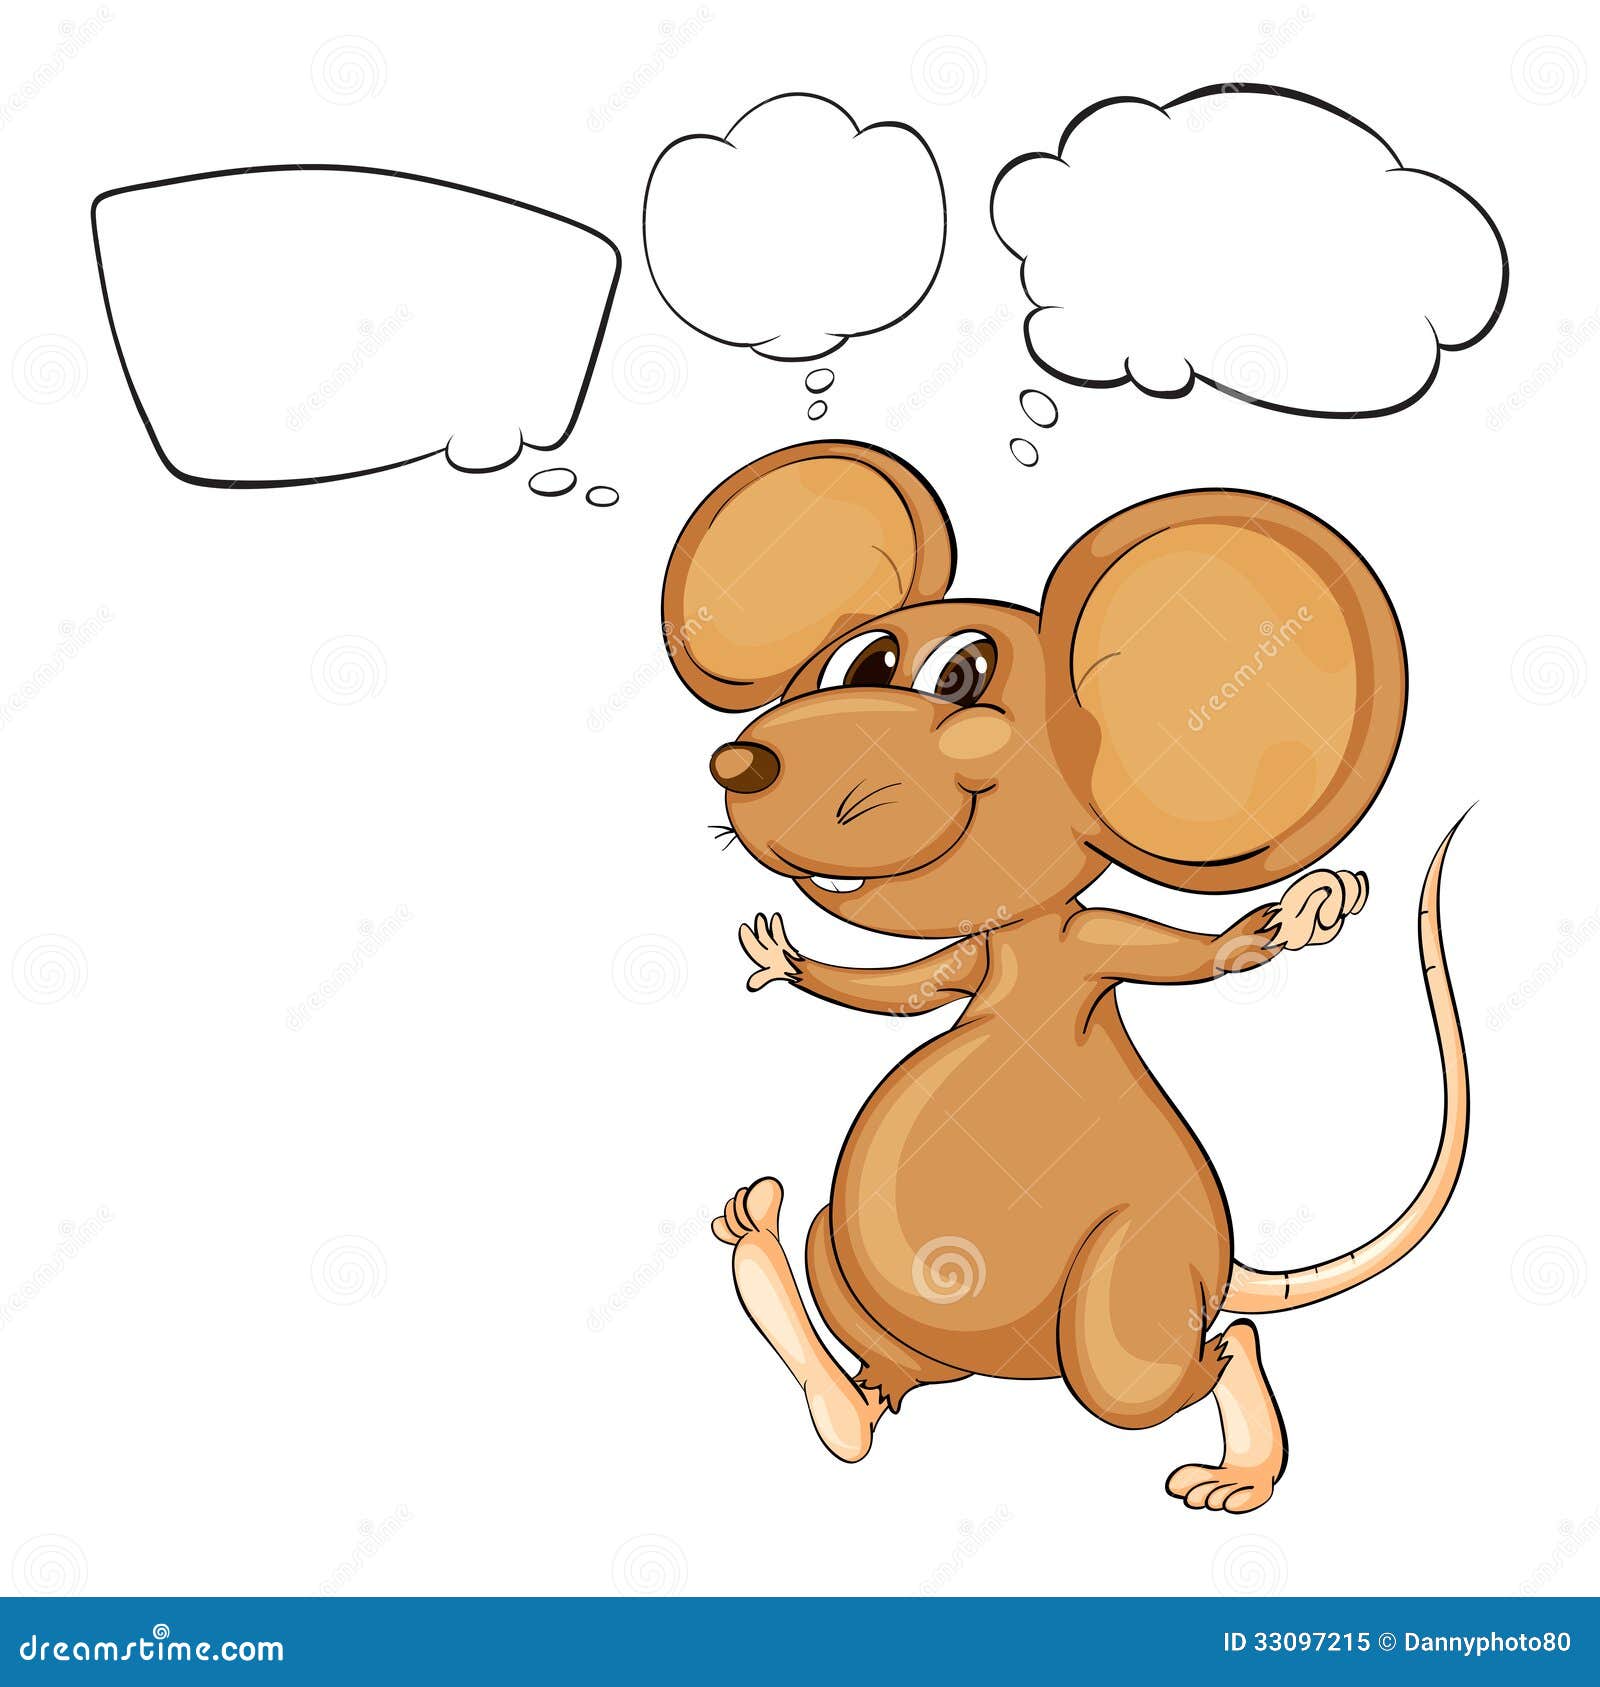 mighty mouse clip art free - photo #20